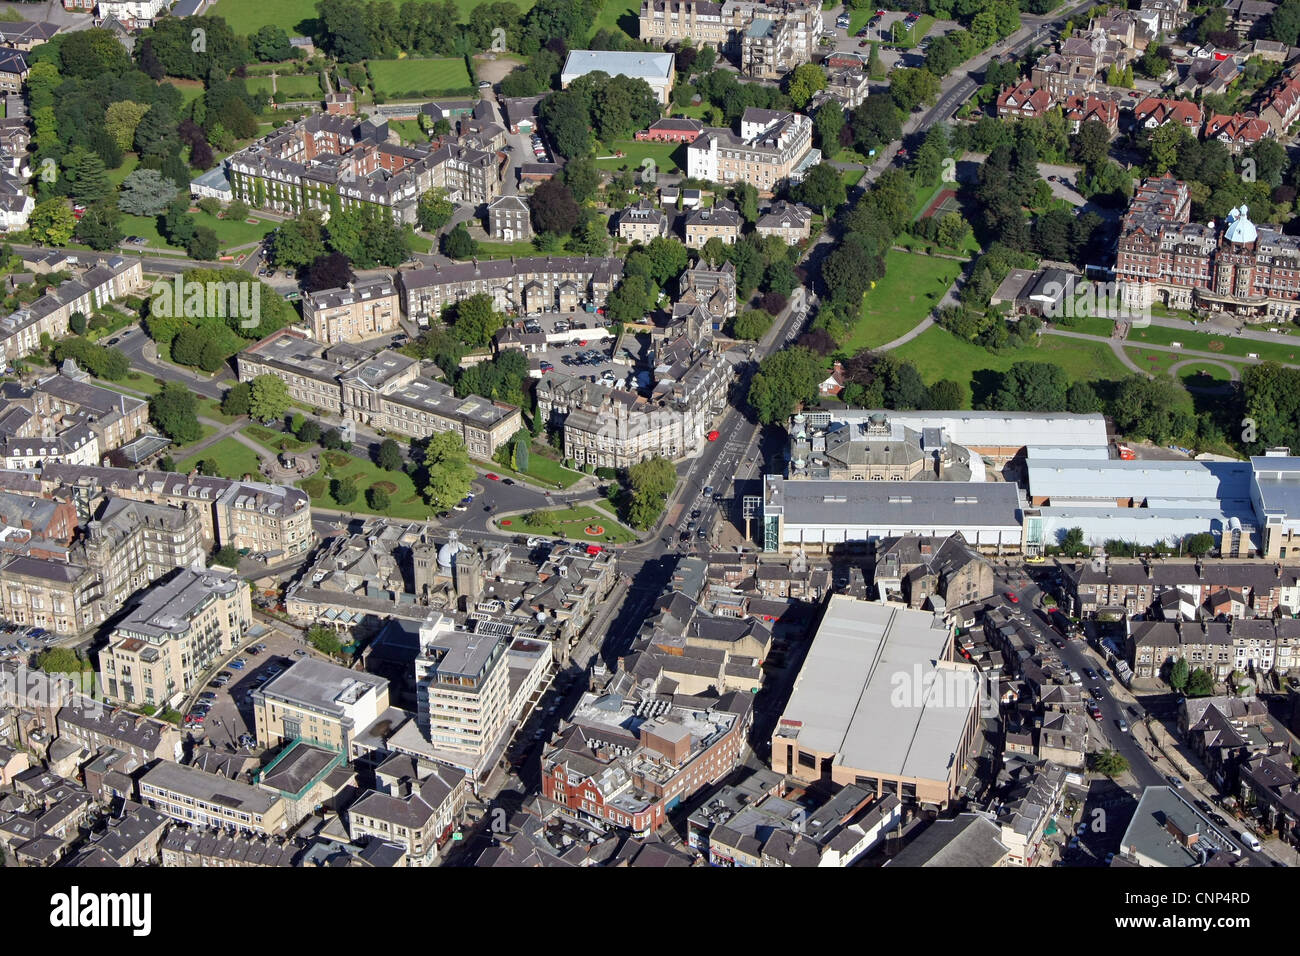 aerial view of Harrogate town centre, looking down Parliament Street, towards The Royal Hall, Royal Baths, the Council Offices on Crescent Gardens Stock Photo